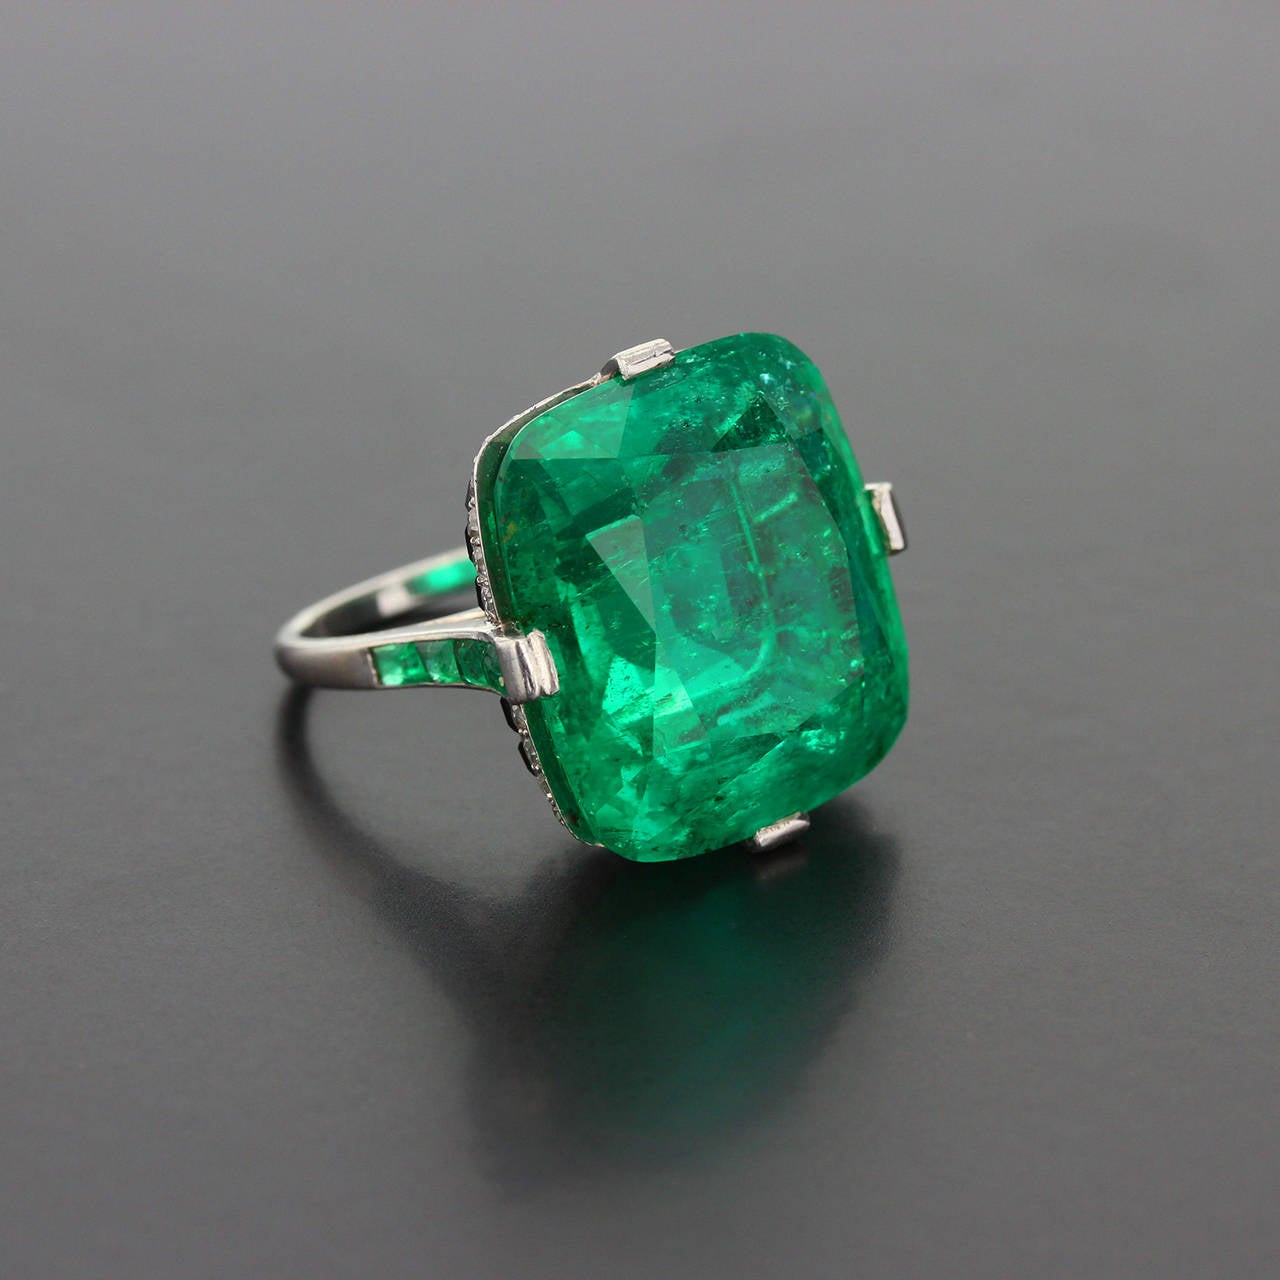 Cartier Important Art Deco Colombian Emerald Onyx Platinum Cocktail Ring For Sale 6